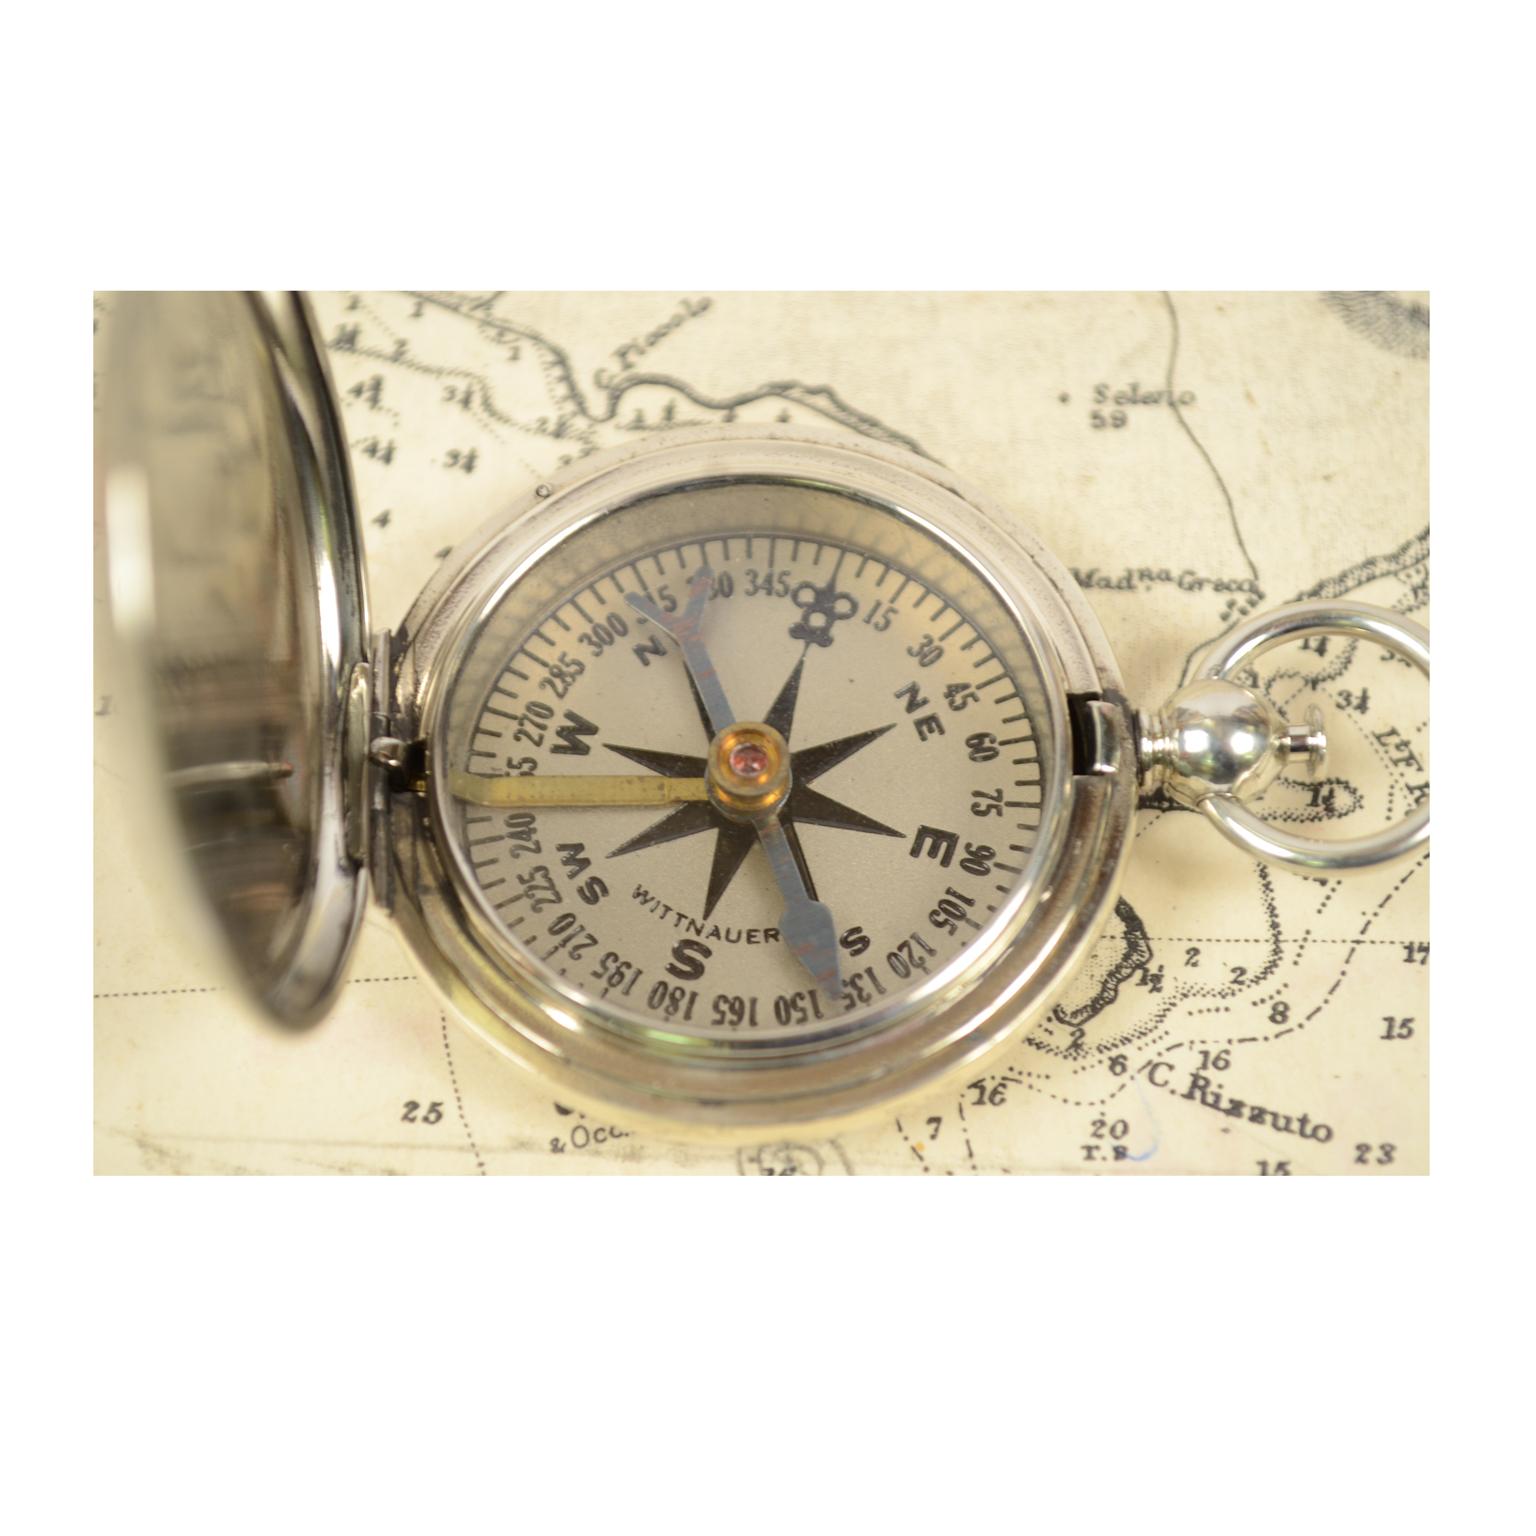 Early 20th Century Compass Used by the American Aviation Officers in the 1920s Signed Wittnauer